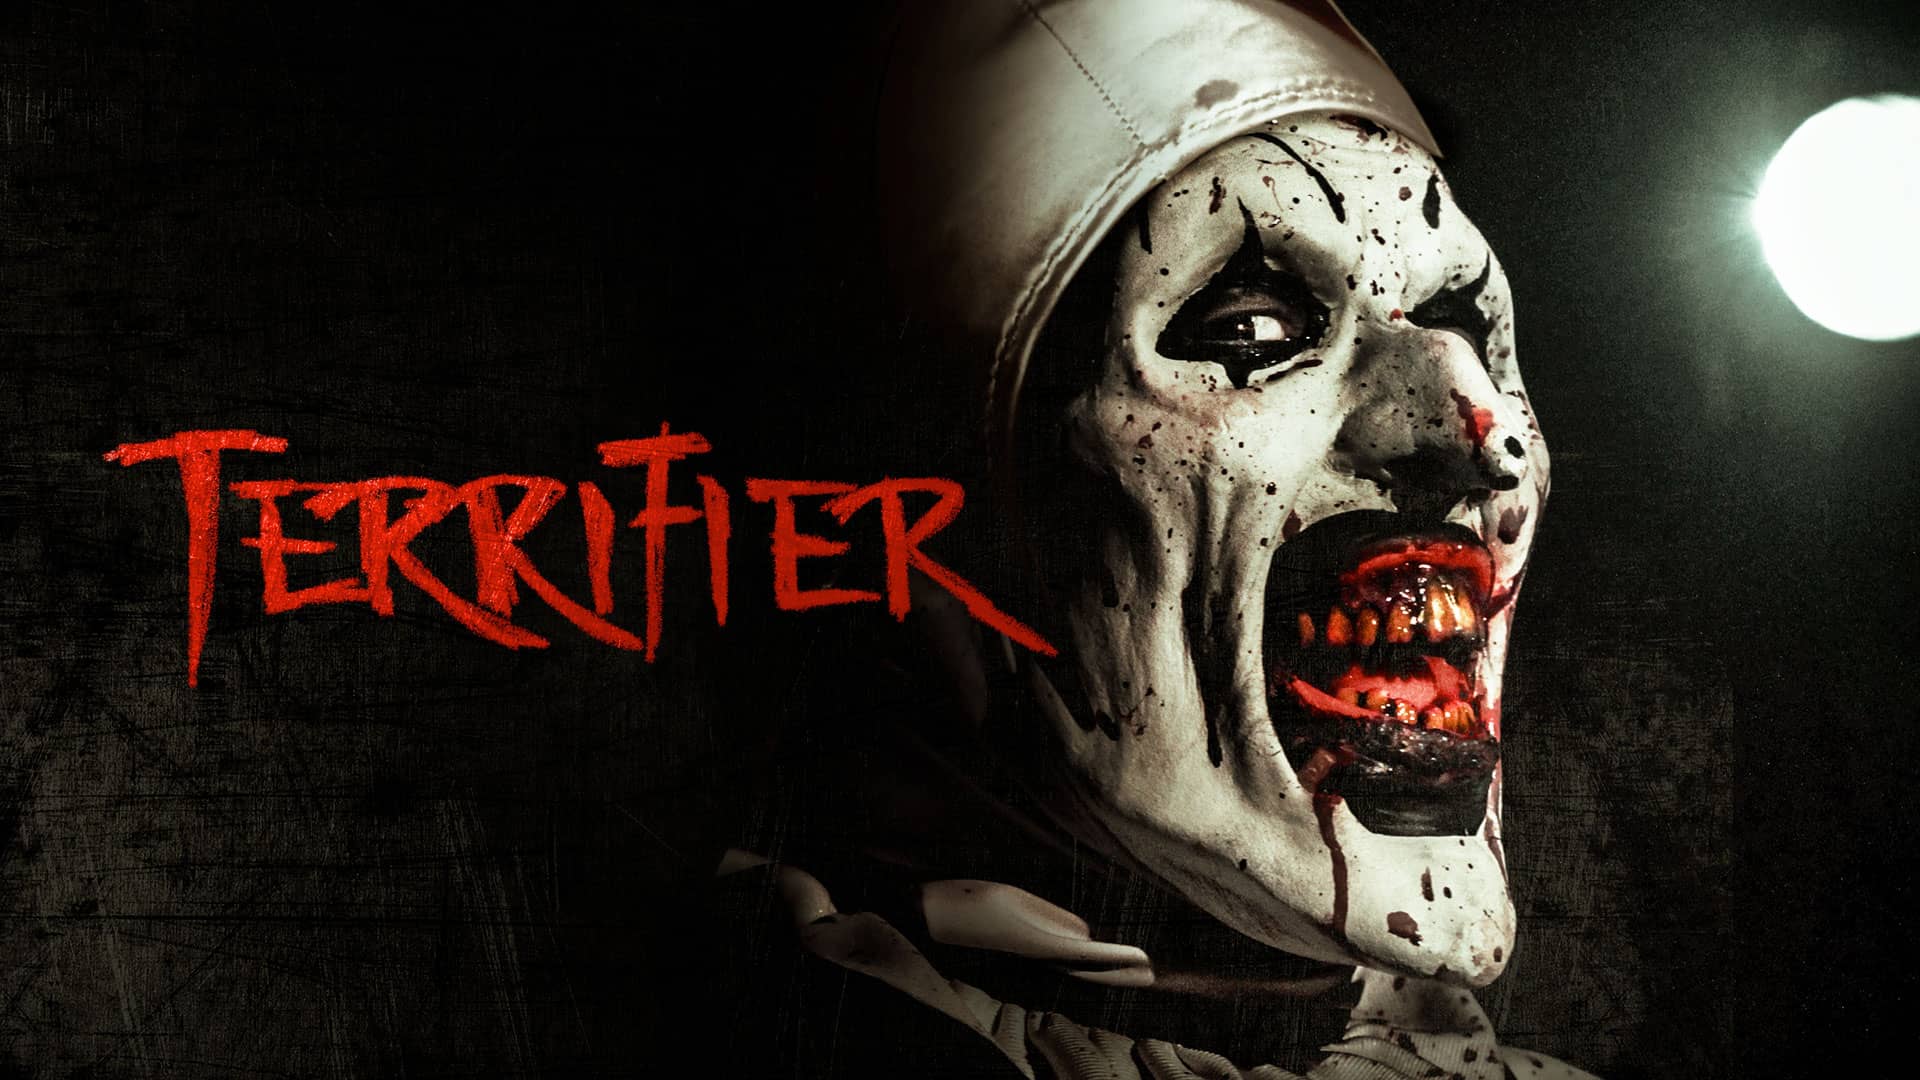 Latest Horror News Mike Flanagans New Horror Shatters Jump Scare Records  As Terrifier 2 Receives a Legendary Rock Band Comparison